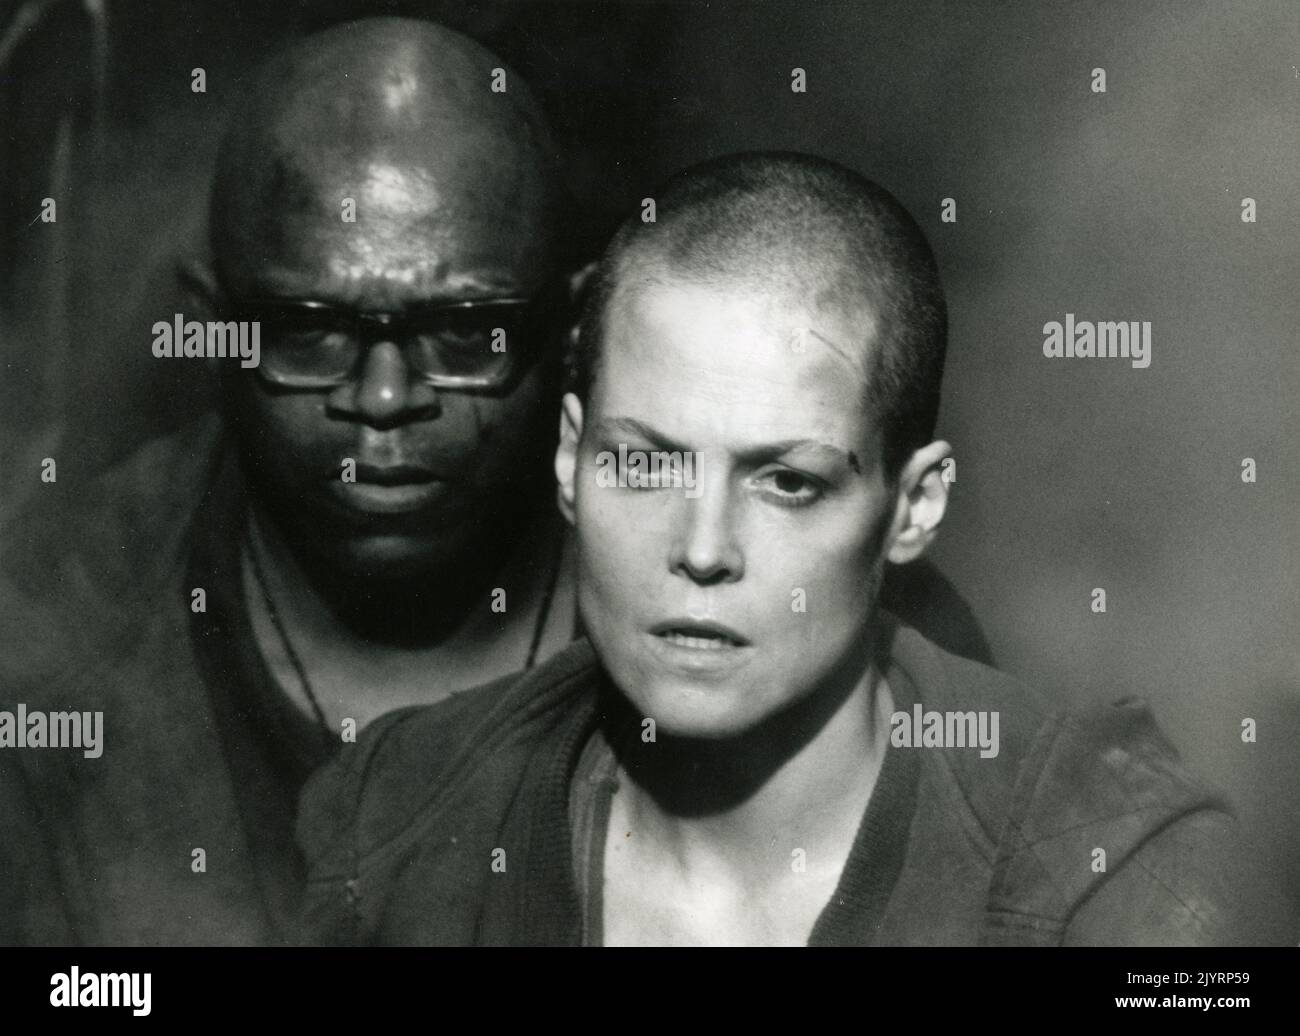 American actor Charles S. Dutton and actress Sigourney Weaver in the movie Alien 3, USA 1992 Stock Photo